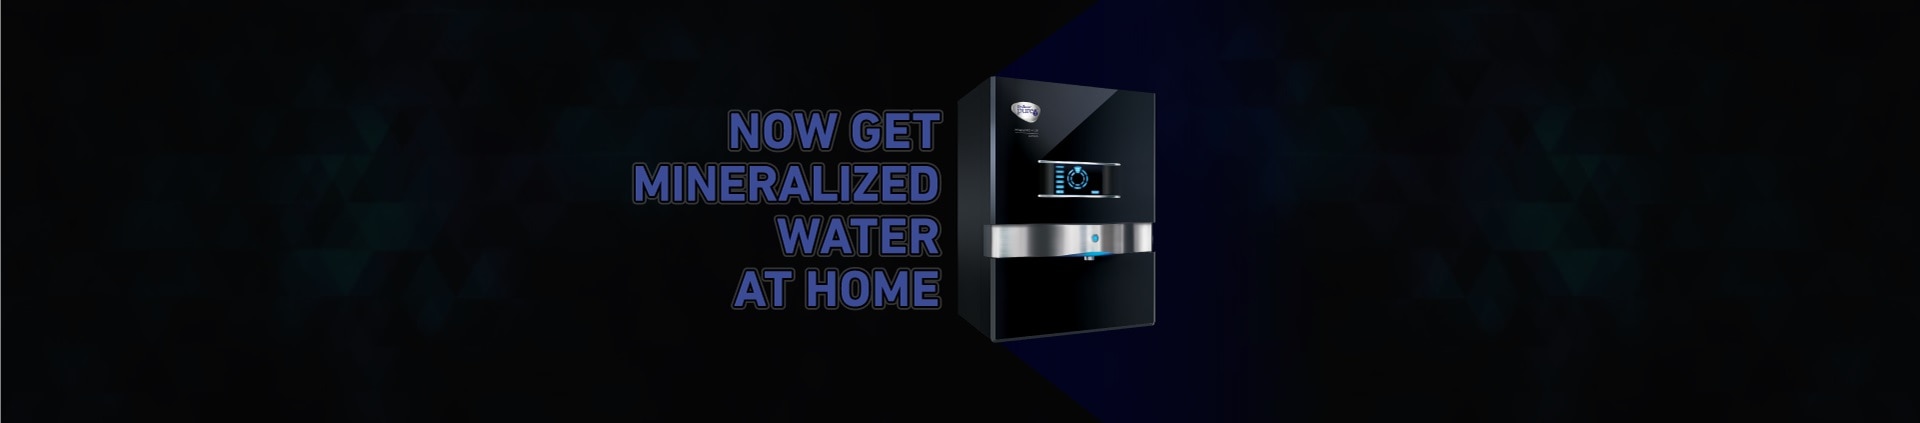 Get minalized water at home